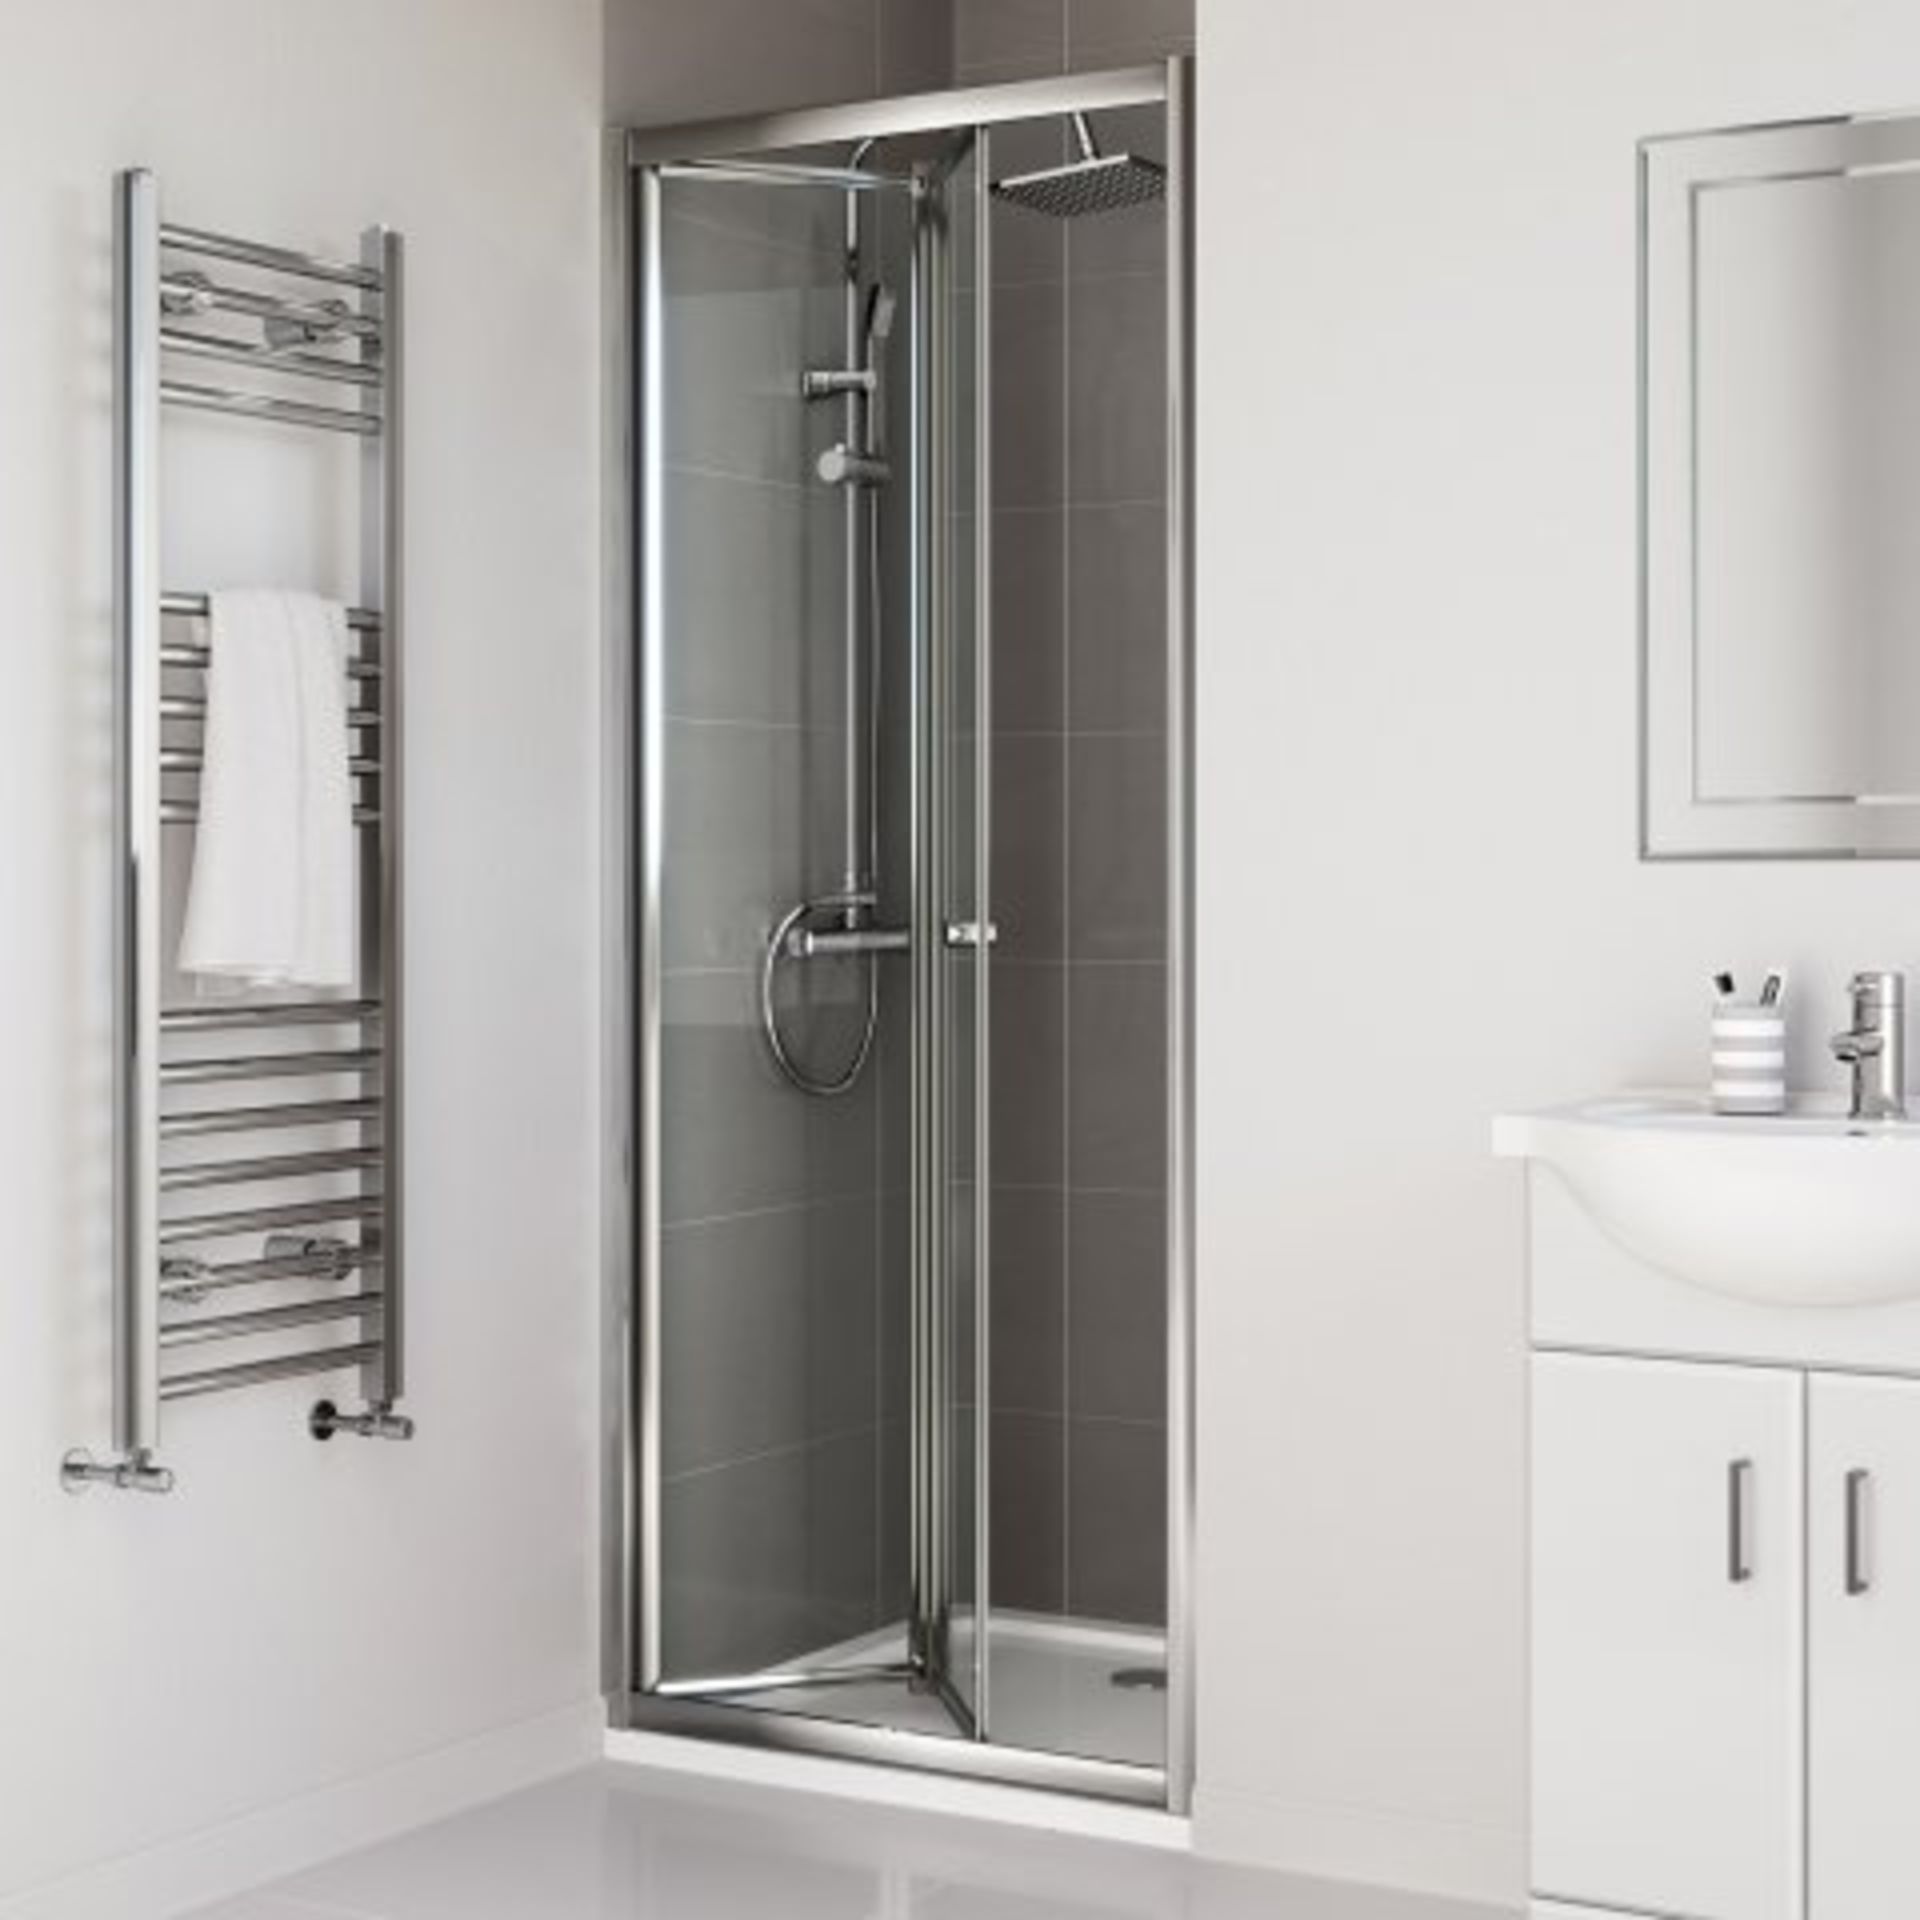 (T261) 700mm - Elements Bi Fold Shower Door RRP £299.99. Do you have an awkward nook or a tricky - Image 2 of 9